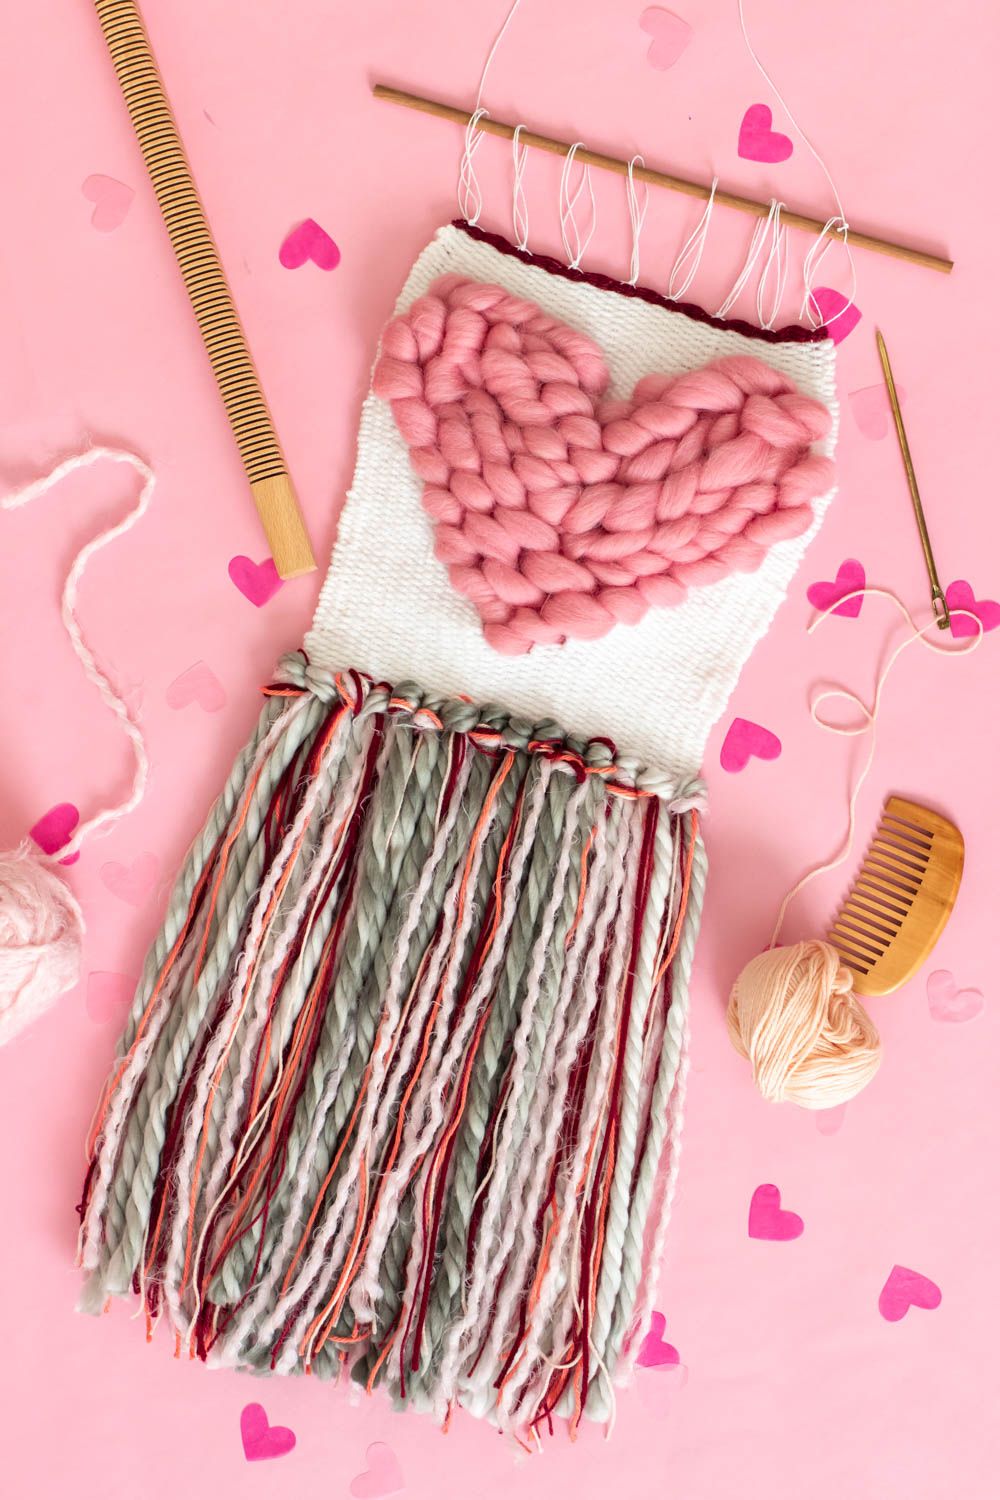 10 of the Best Homemade Valentines Gifts – Arts and Classy